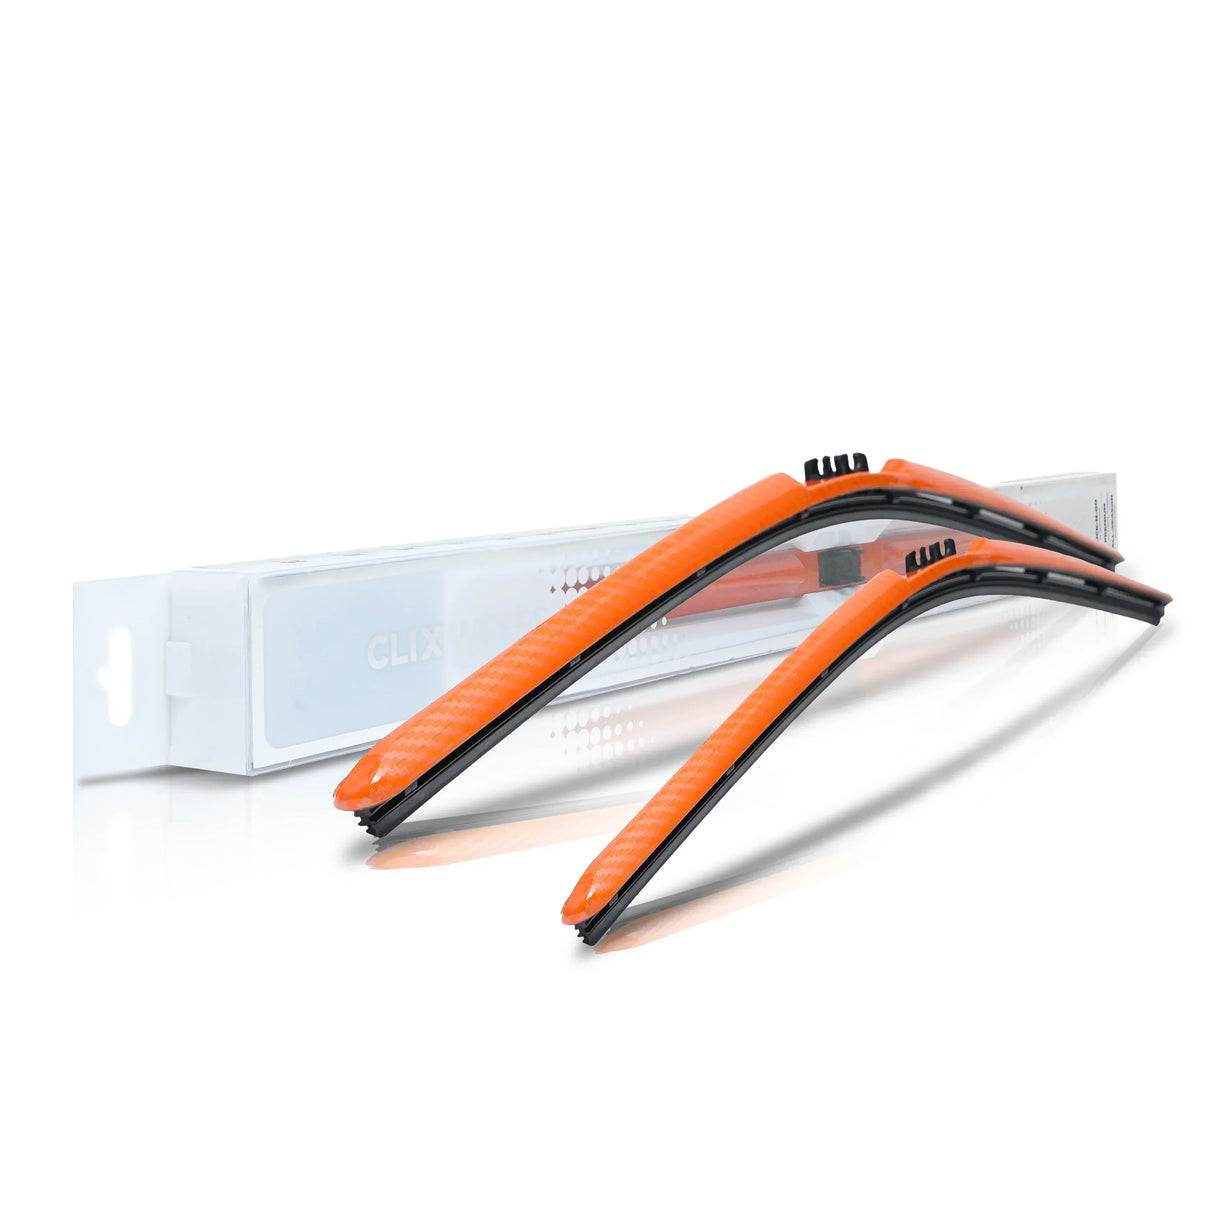 Clean Sweep: Jeep® Performance Parts Introduces New, High-performance Windshield  Wiper Blades 